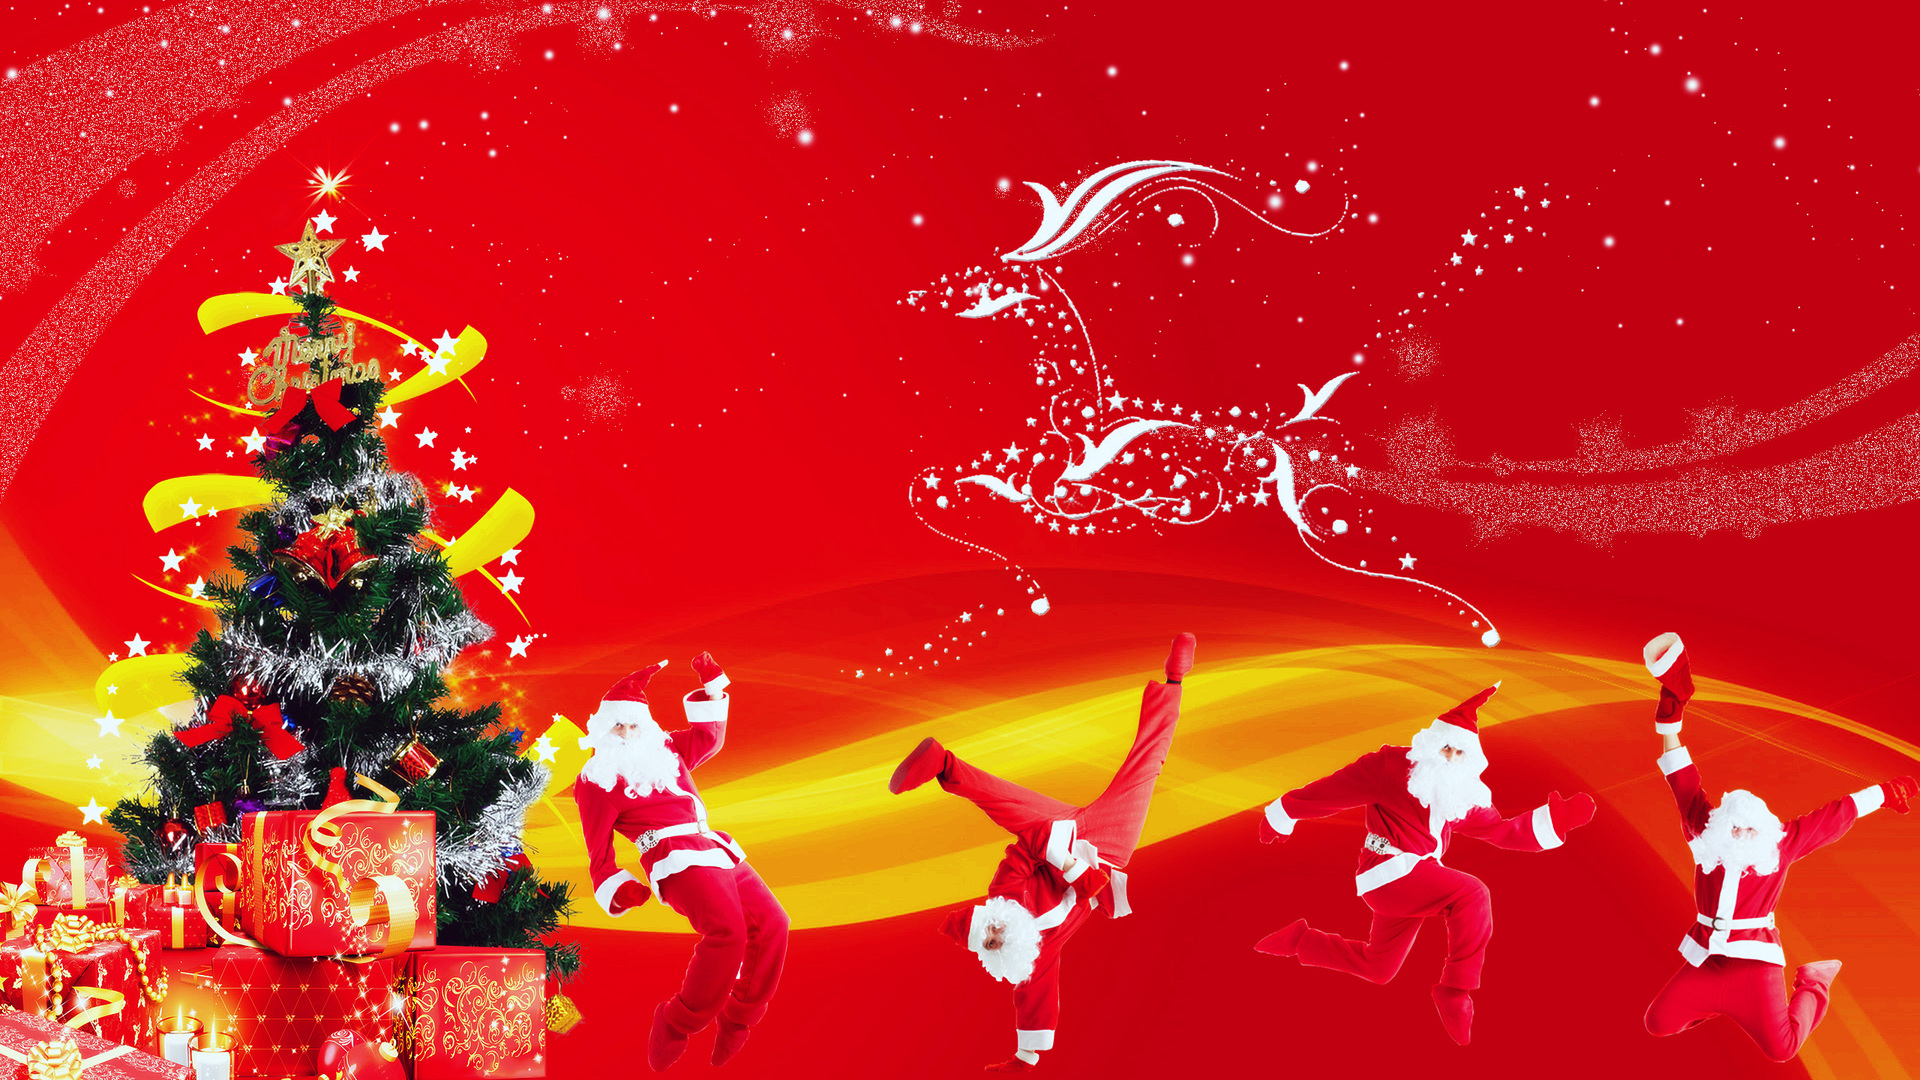 Funny Christmas Wallpaper By HD Swcrown